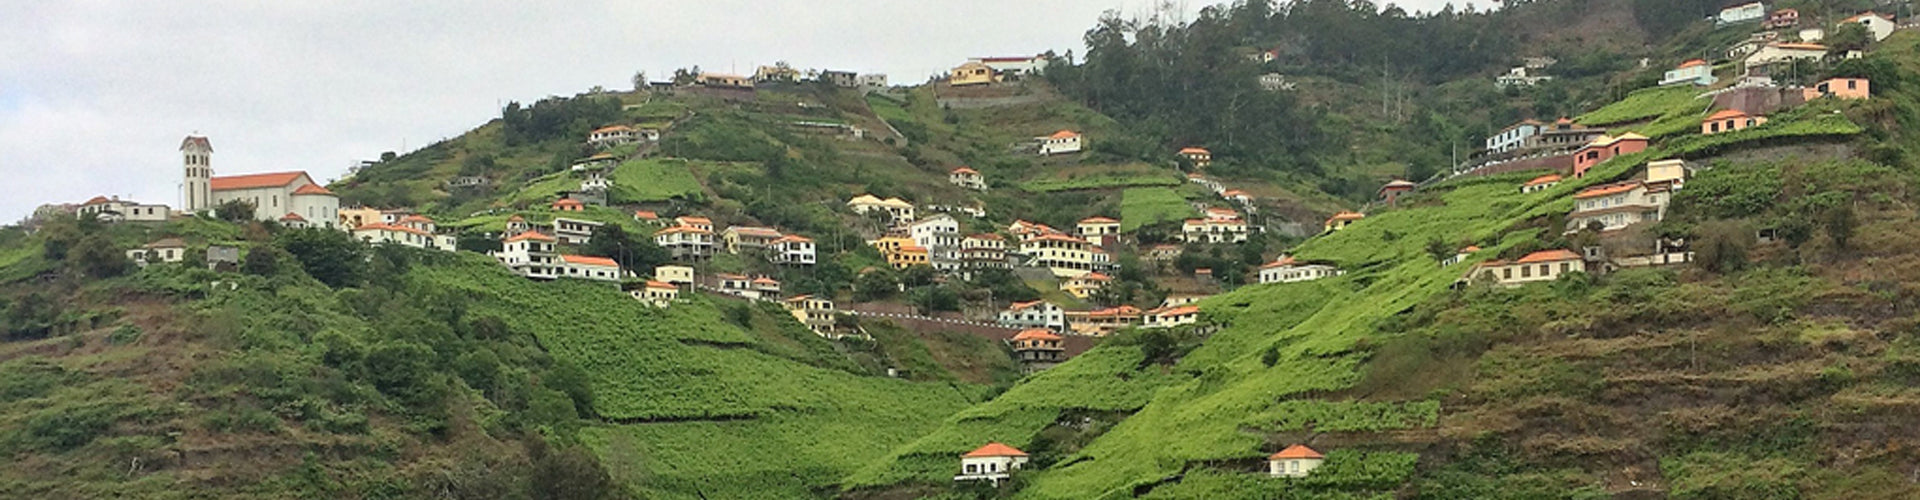 Vineyards perched on the hillsides of Madeira